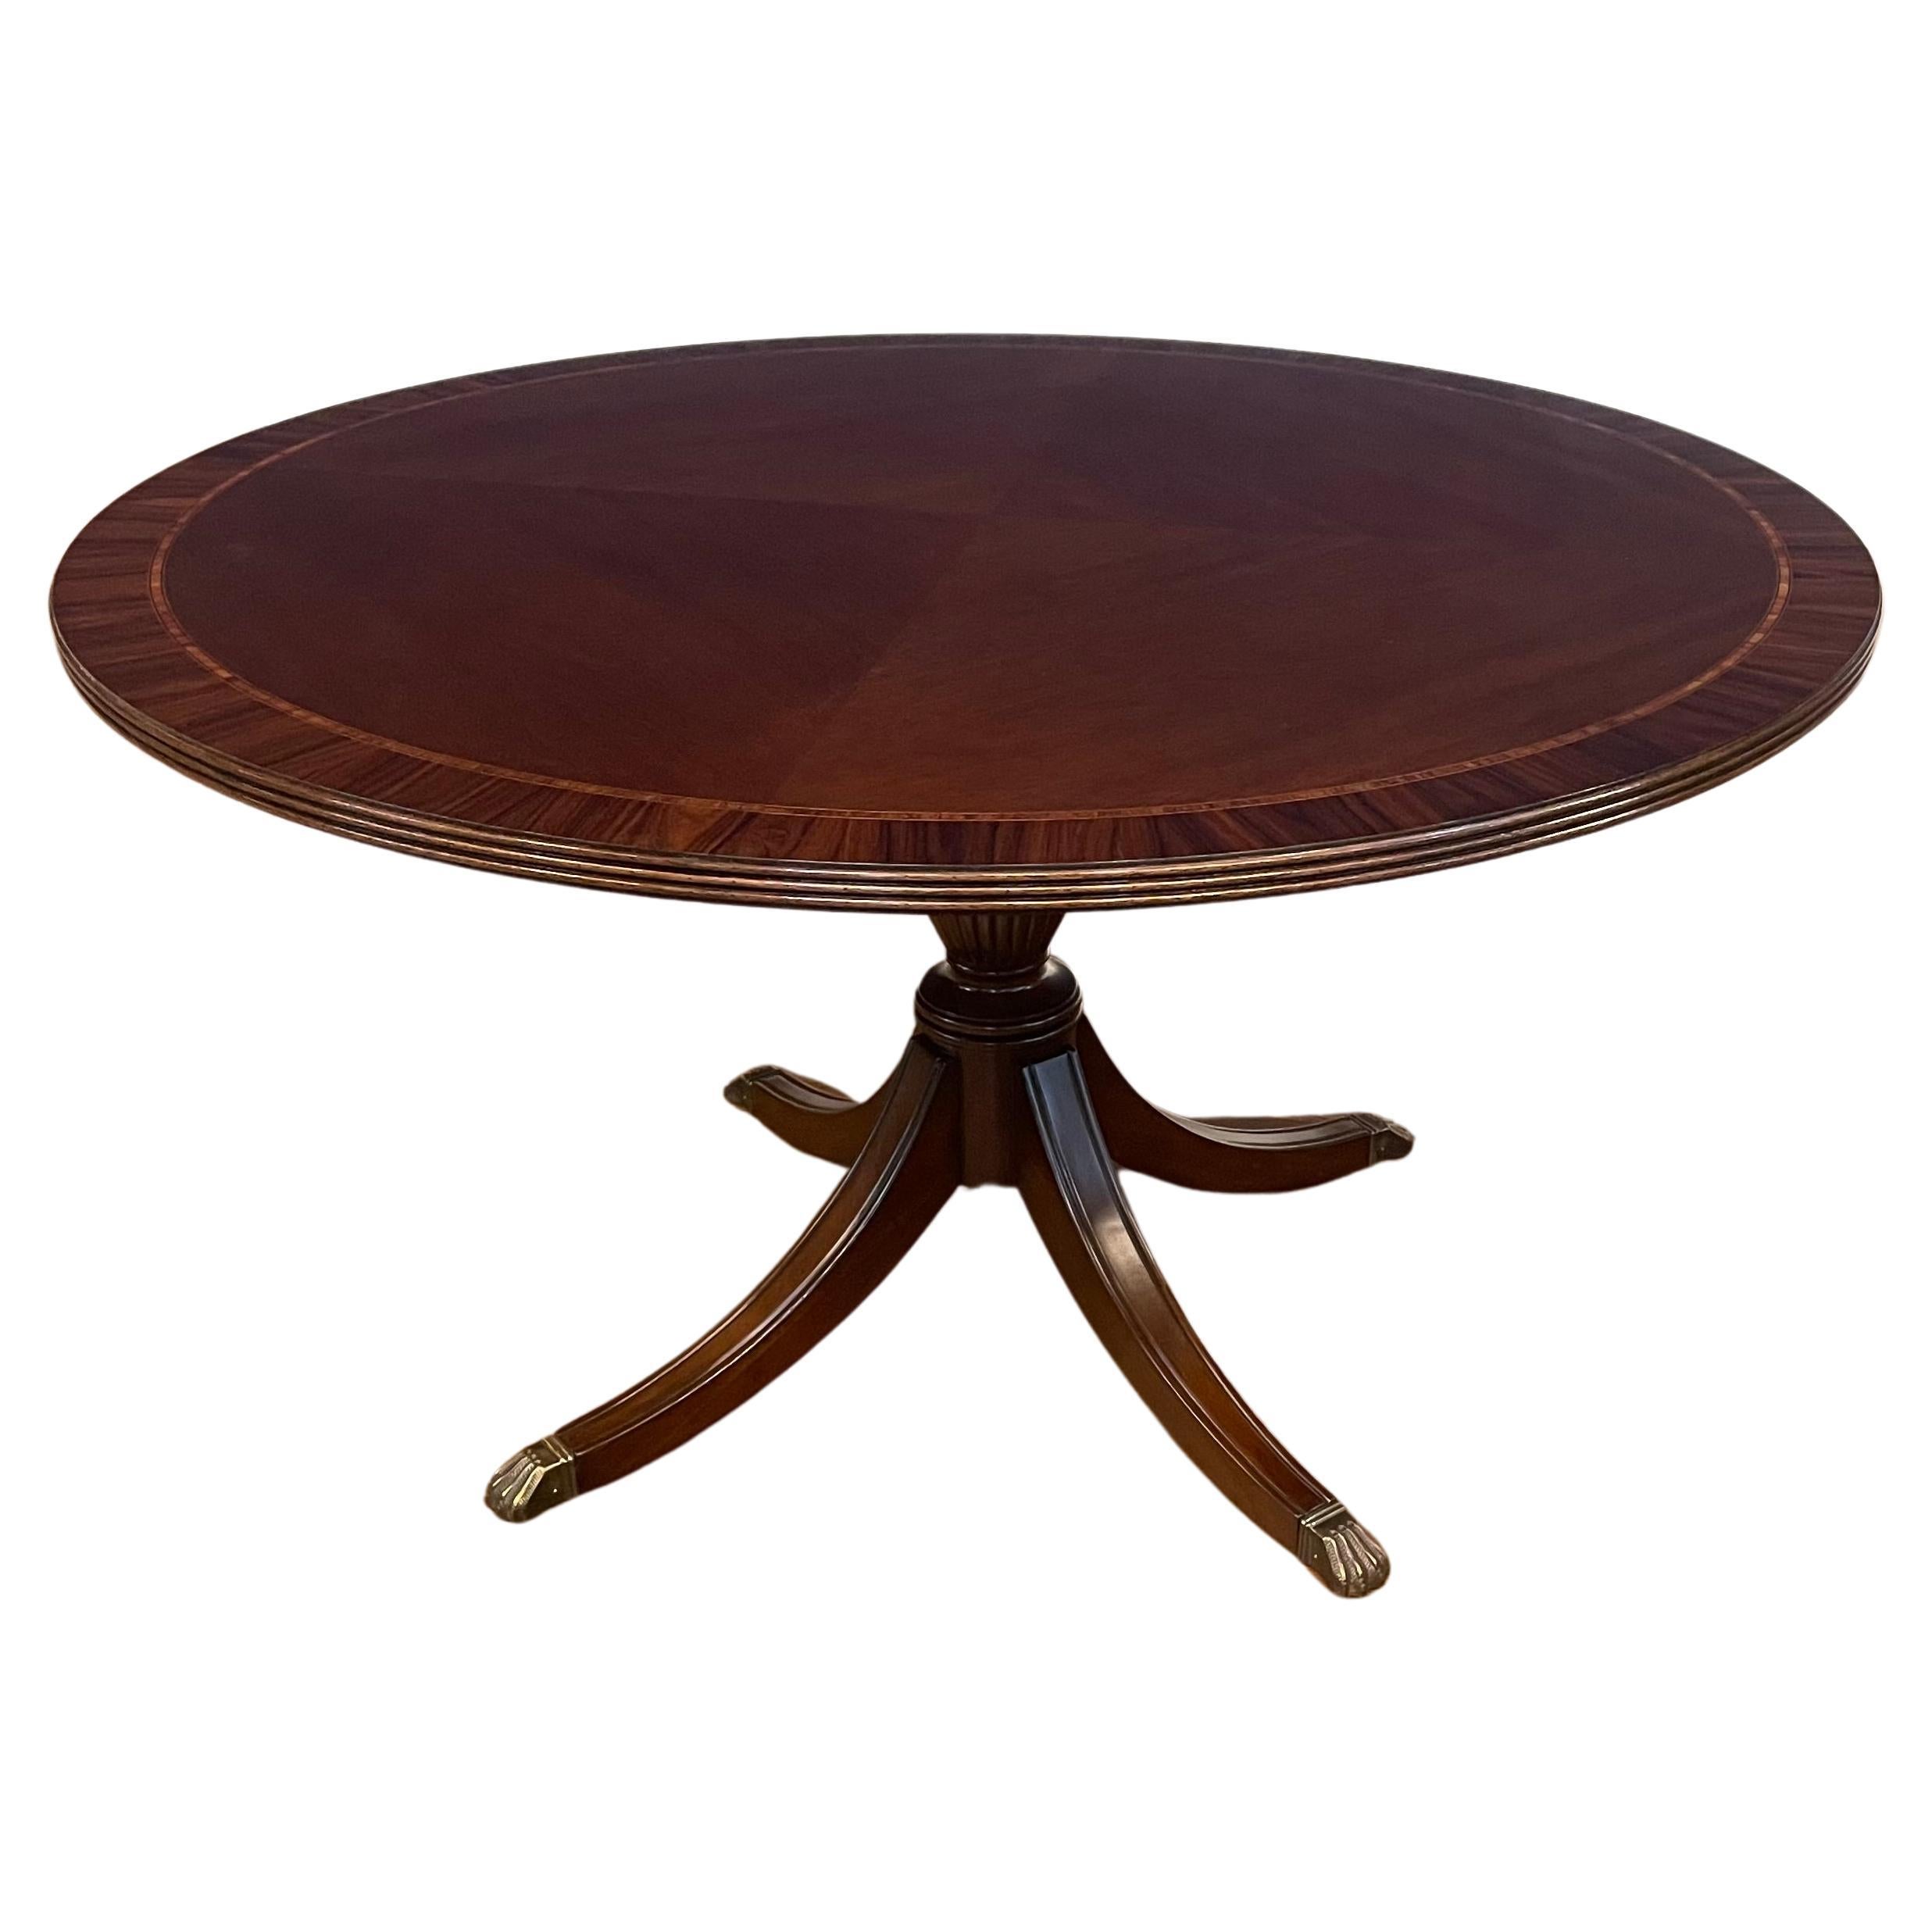 54 Inch Round Mahogany Dining Table by Leighton Hall - Showroom Sample For Sale